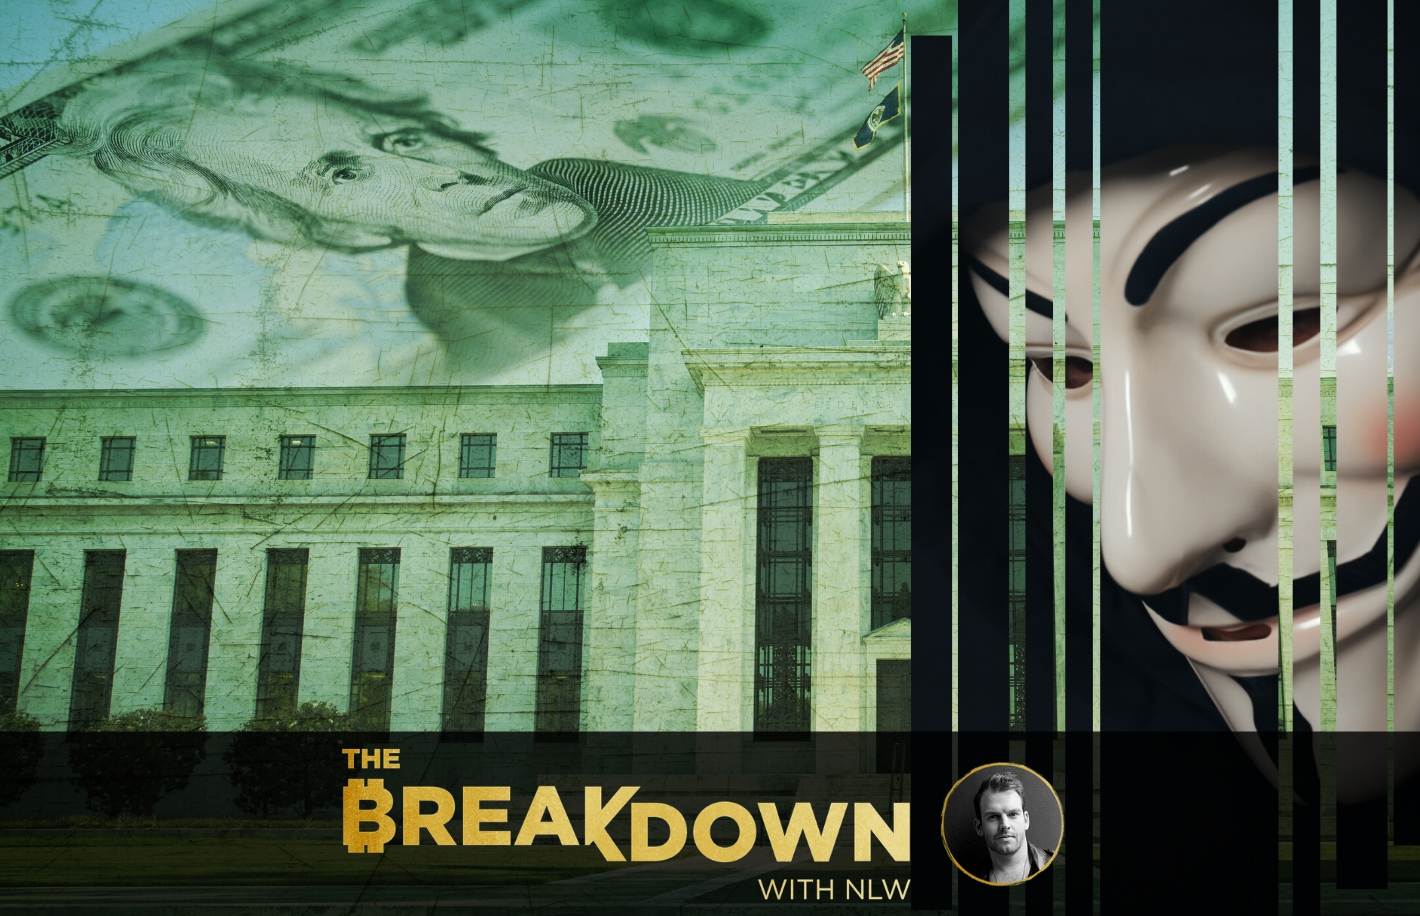 The Federal Reserve Has Its ‘Come to Satoshi’ Second